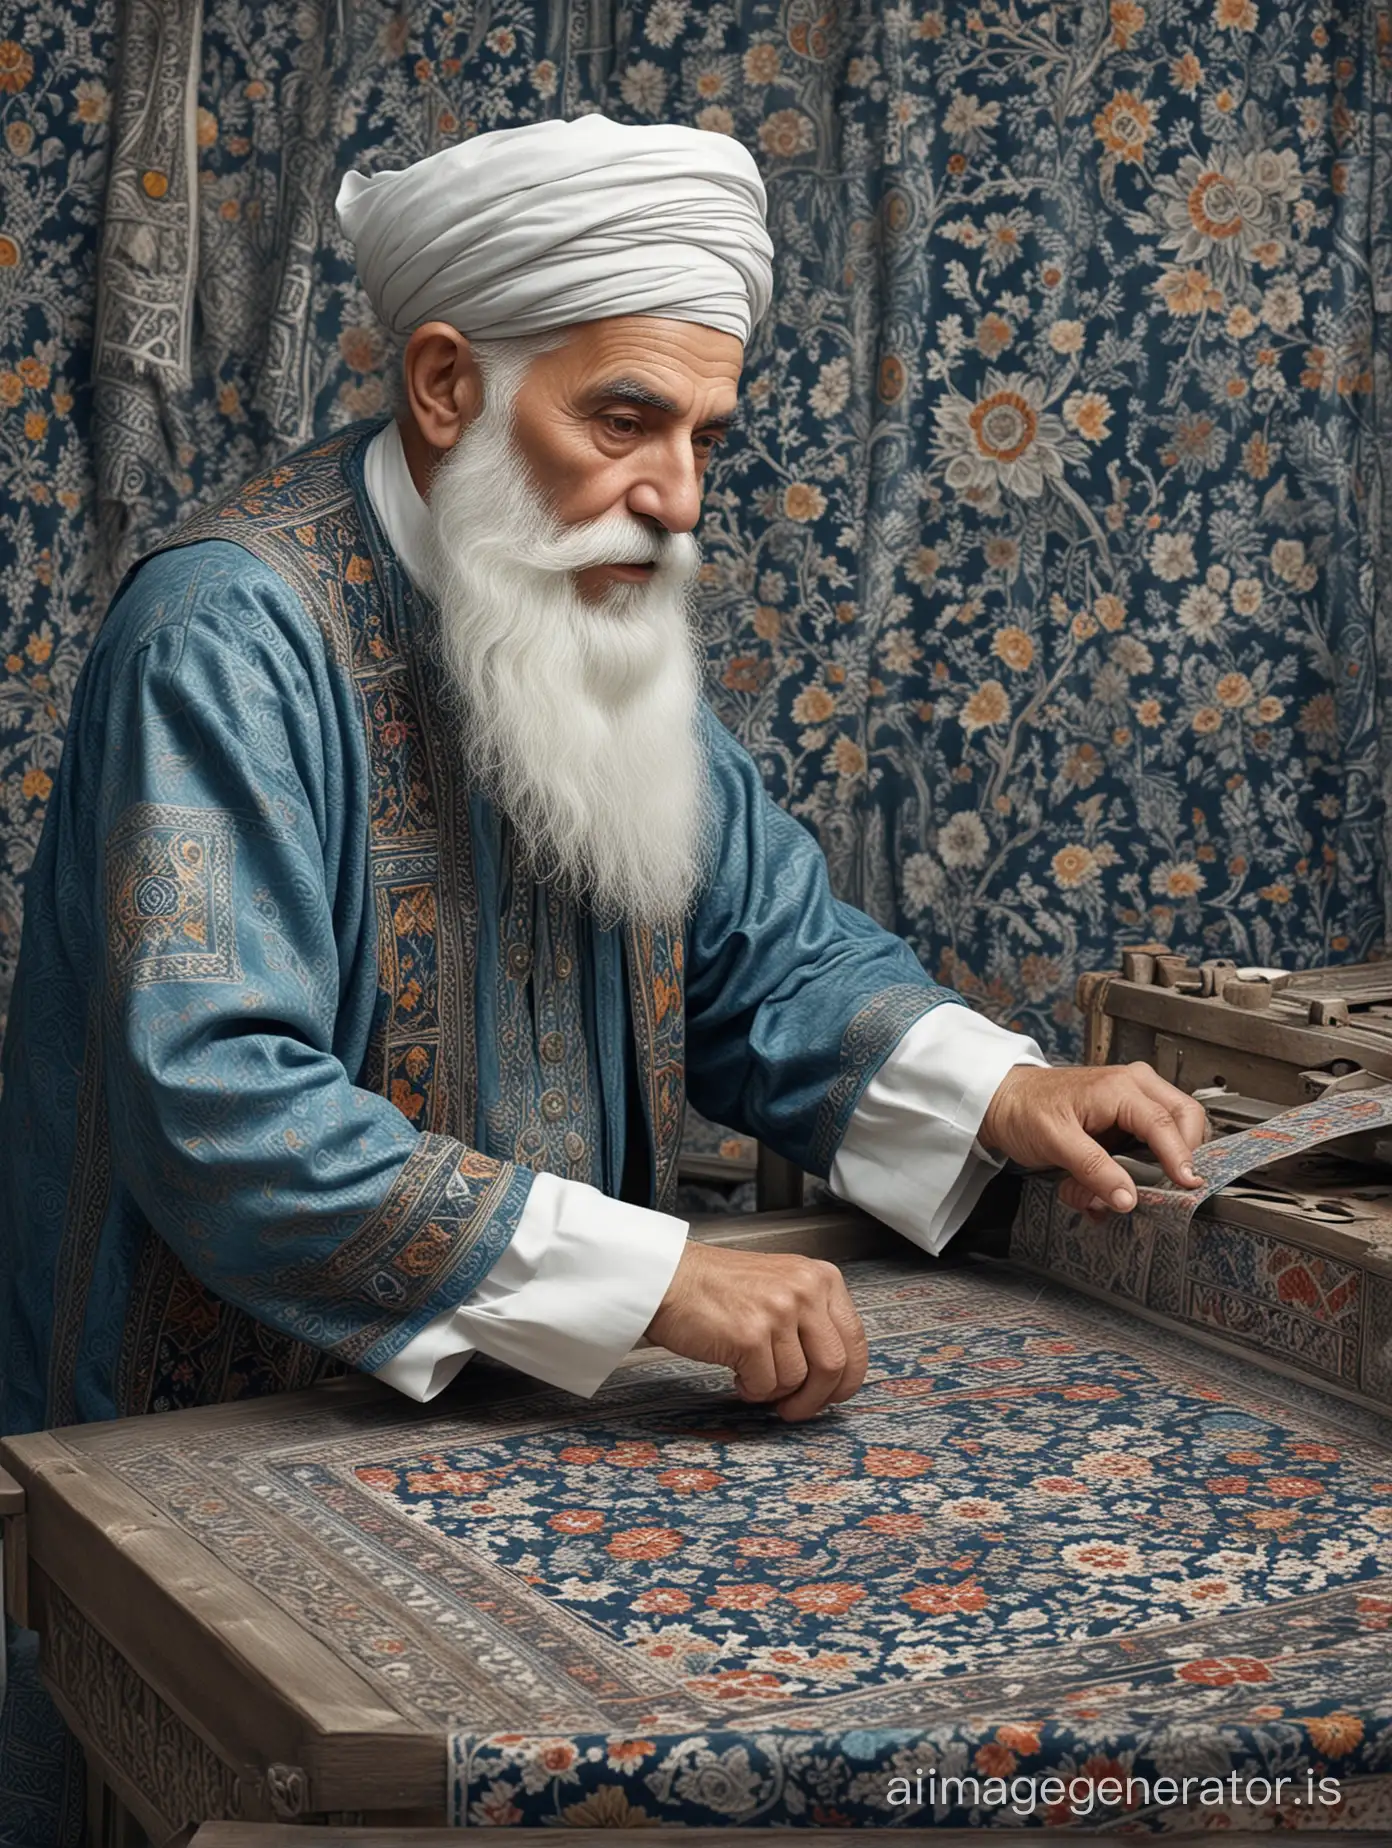 Elderly blue grey man with white beard using industrial pigment digital printing machine; Persian folk art fabric adorned with traditional motifs; old-fashioned style; hyper-realistic.